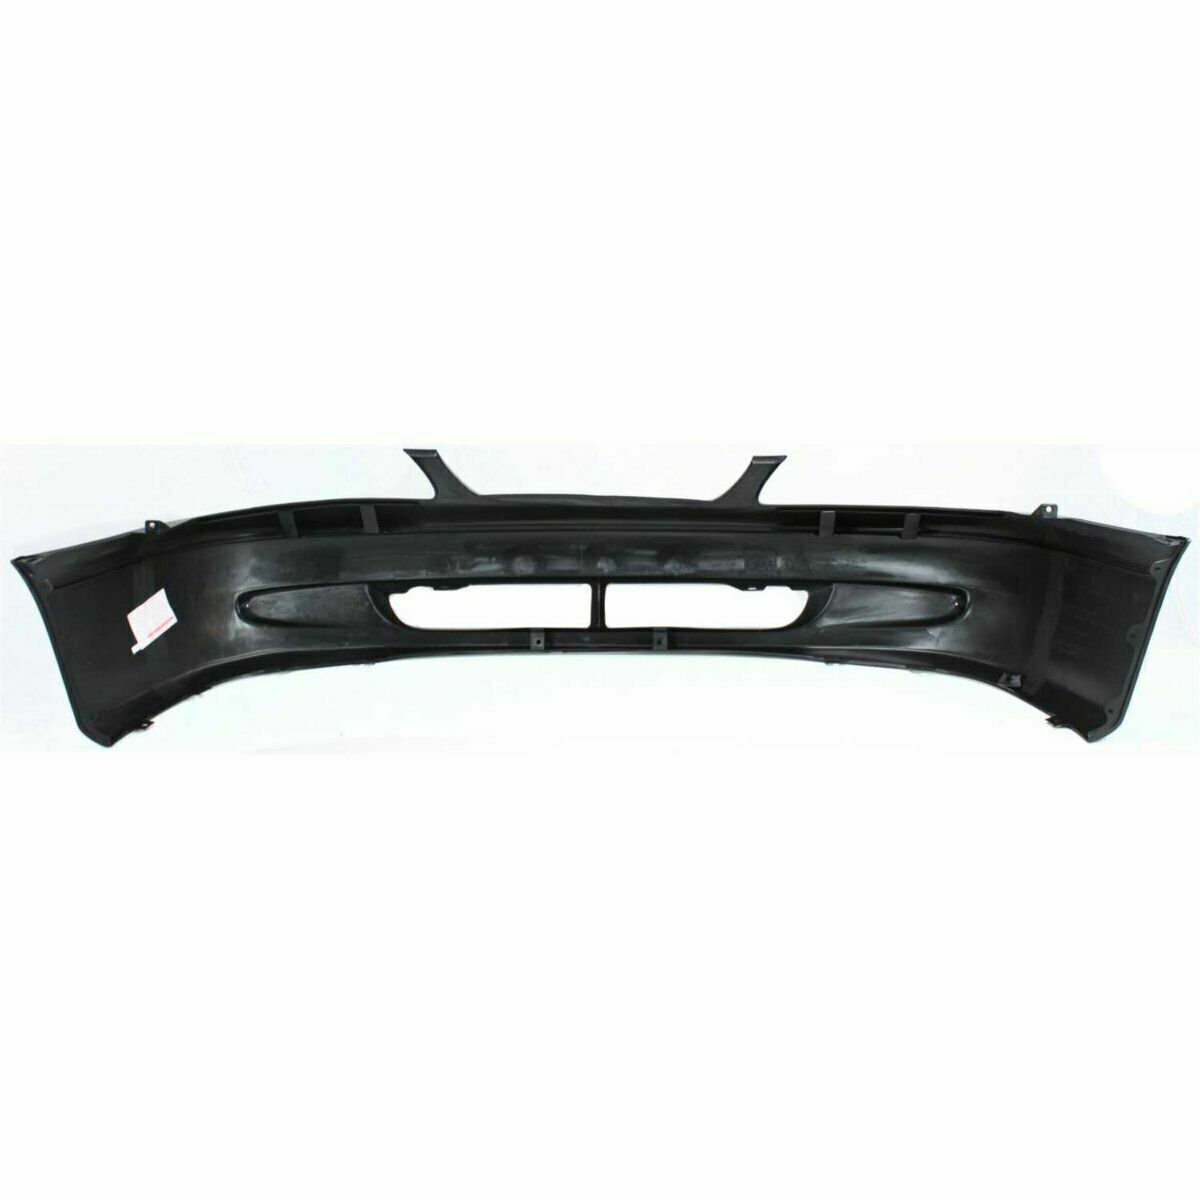 1998-1999 MAZDA 626; Front Bumper Cover; Painted to Match